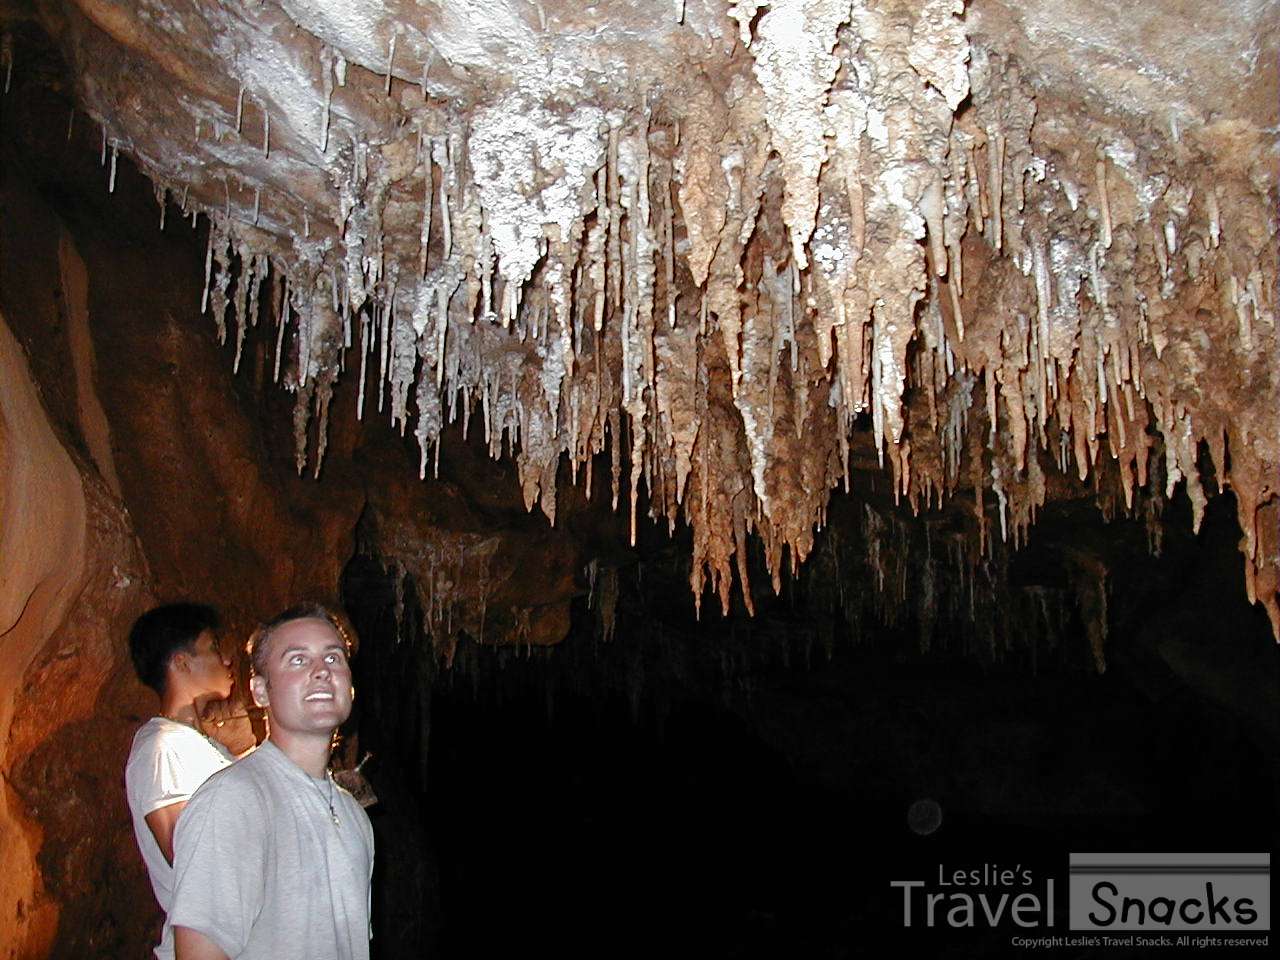 Stalactites in the Wong Badem Cave. The caves and waterfalls on the tour were nice after all the depressing war history.